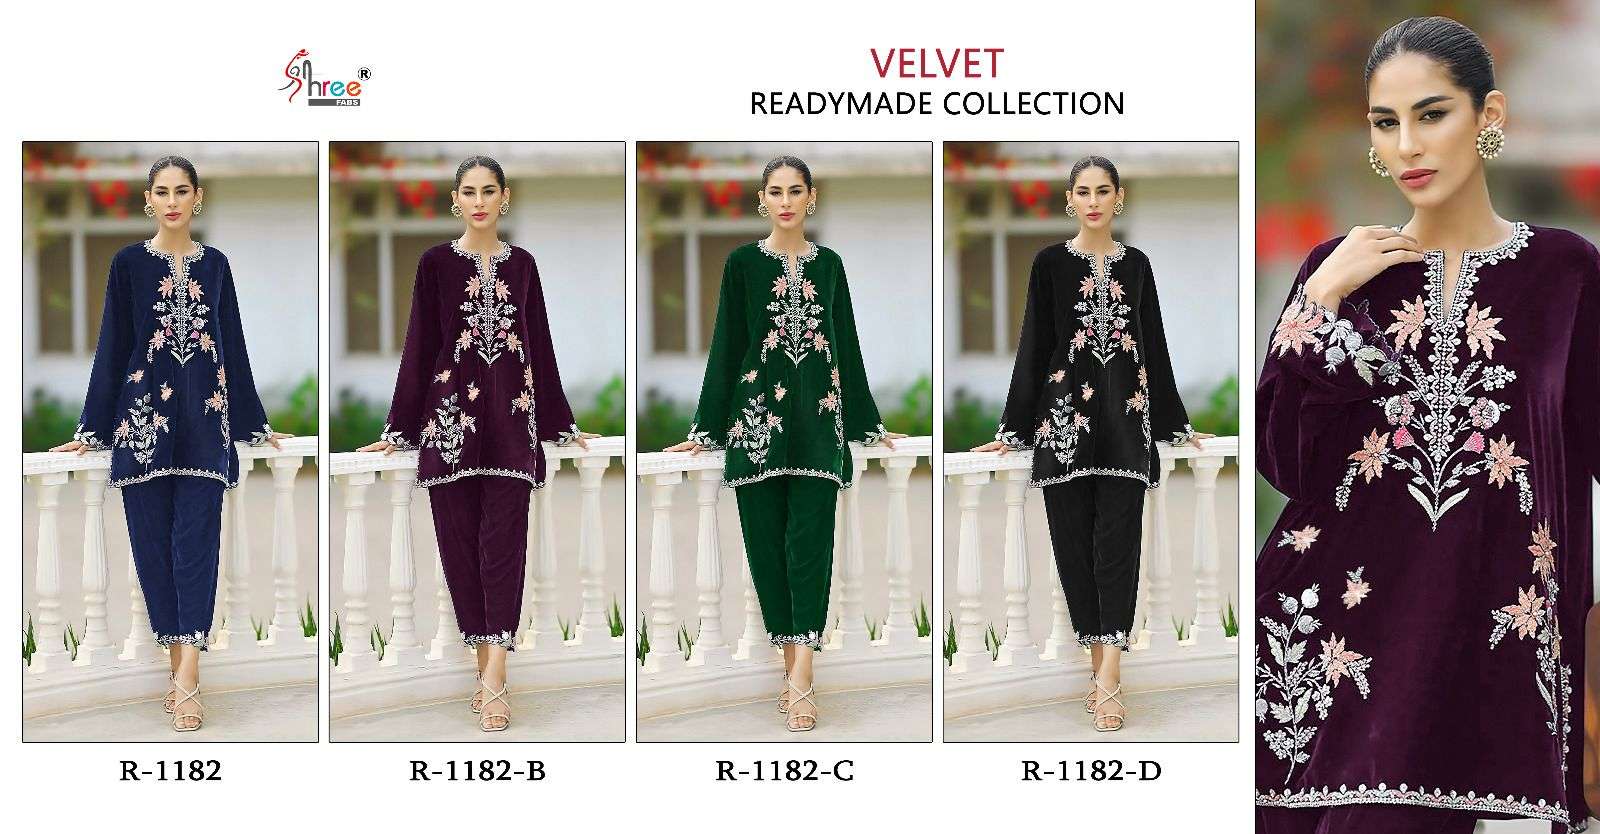 SHREE FABS VELVET READY MADE COLLECTION 